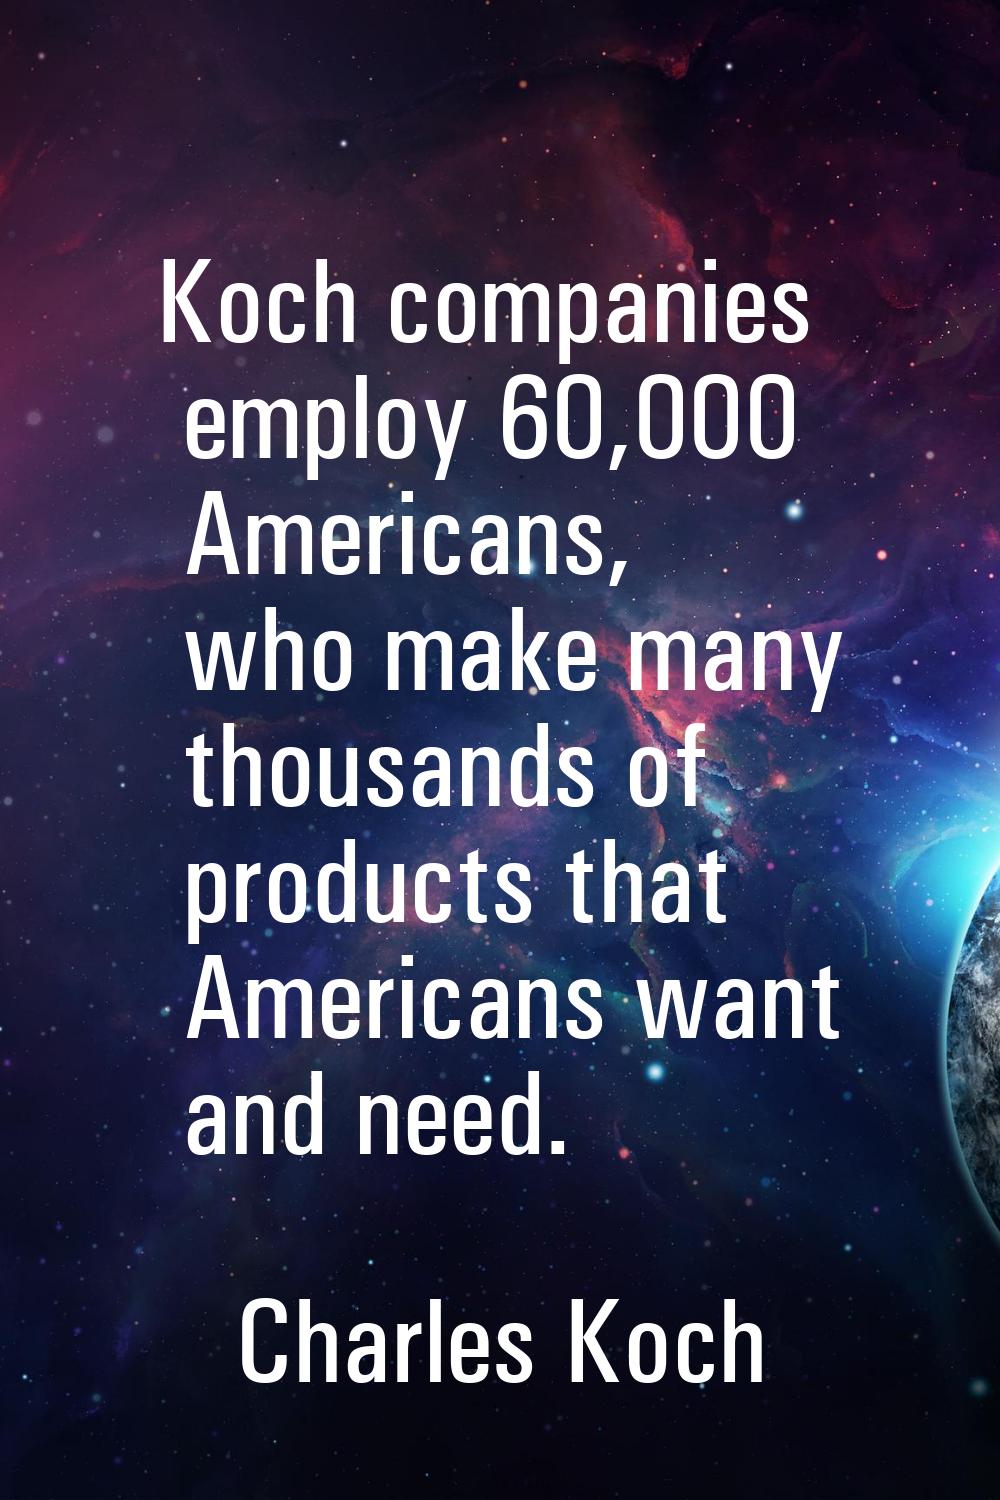 Koch companies employ 60,000 Americans, who make many thousands of products that Americans want and